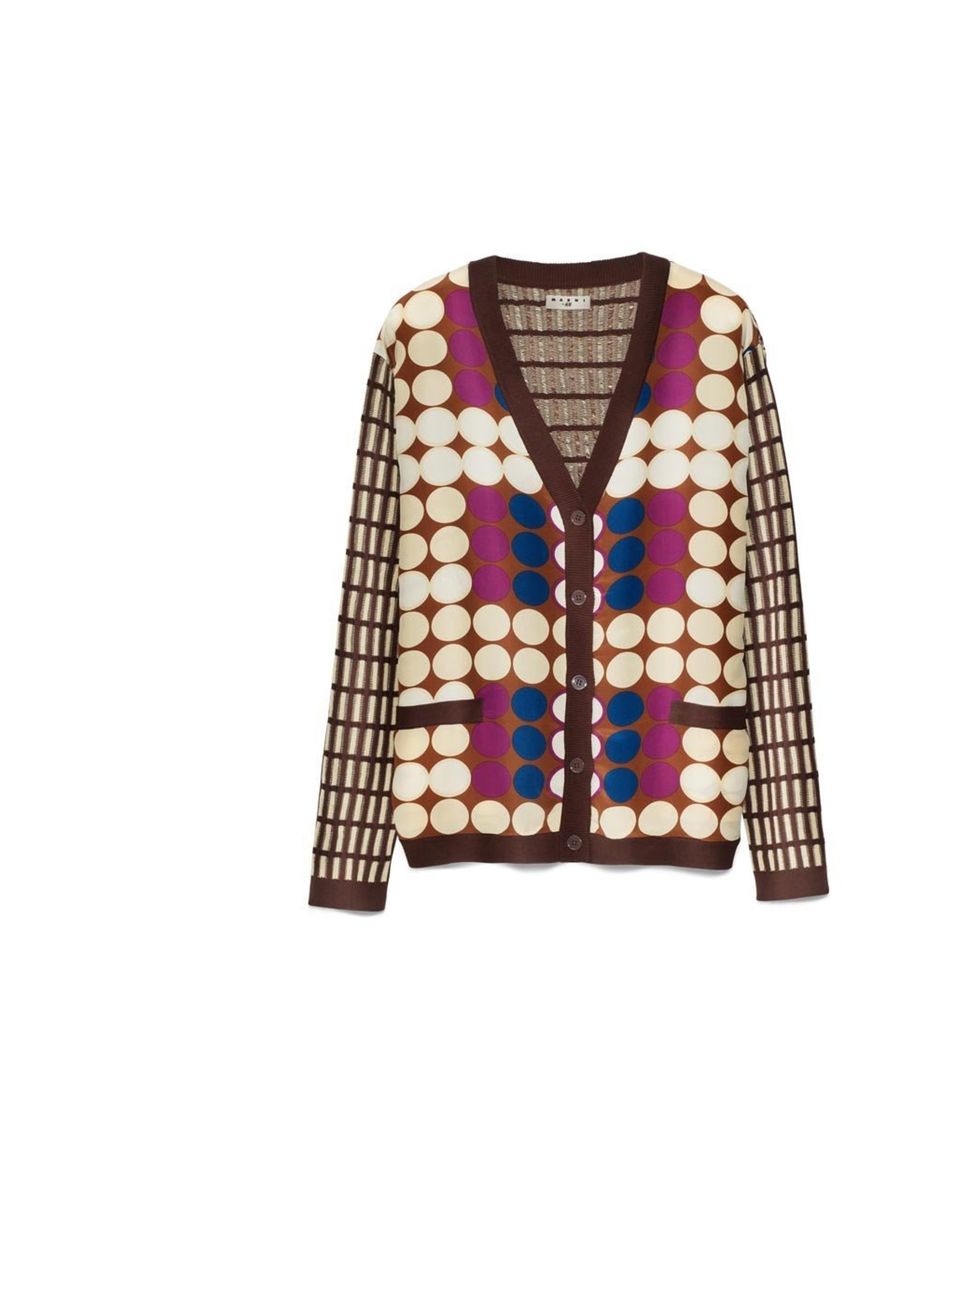 <p><a href="http://www.elleuk.com/fashion/news/sofia-coppola-takes-marni-for-h-m-to-marrakech">Marni for H&amp;M</a> cardigan, £59.99, available at <a href="http://www.hm.com/gb/">H&amp;M</a></p>